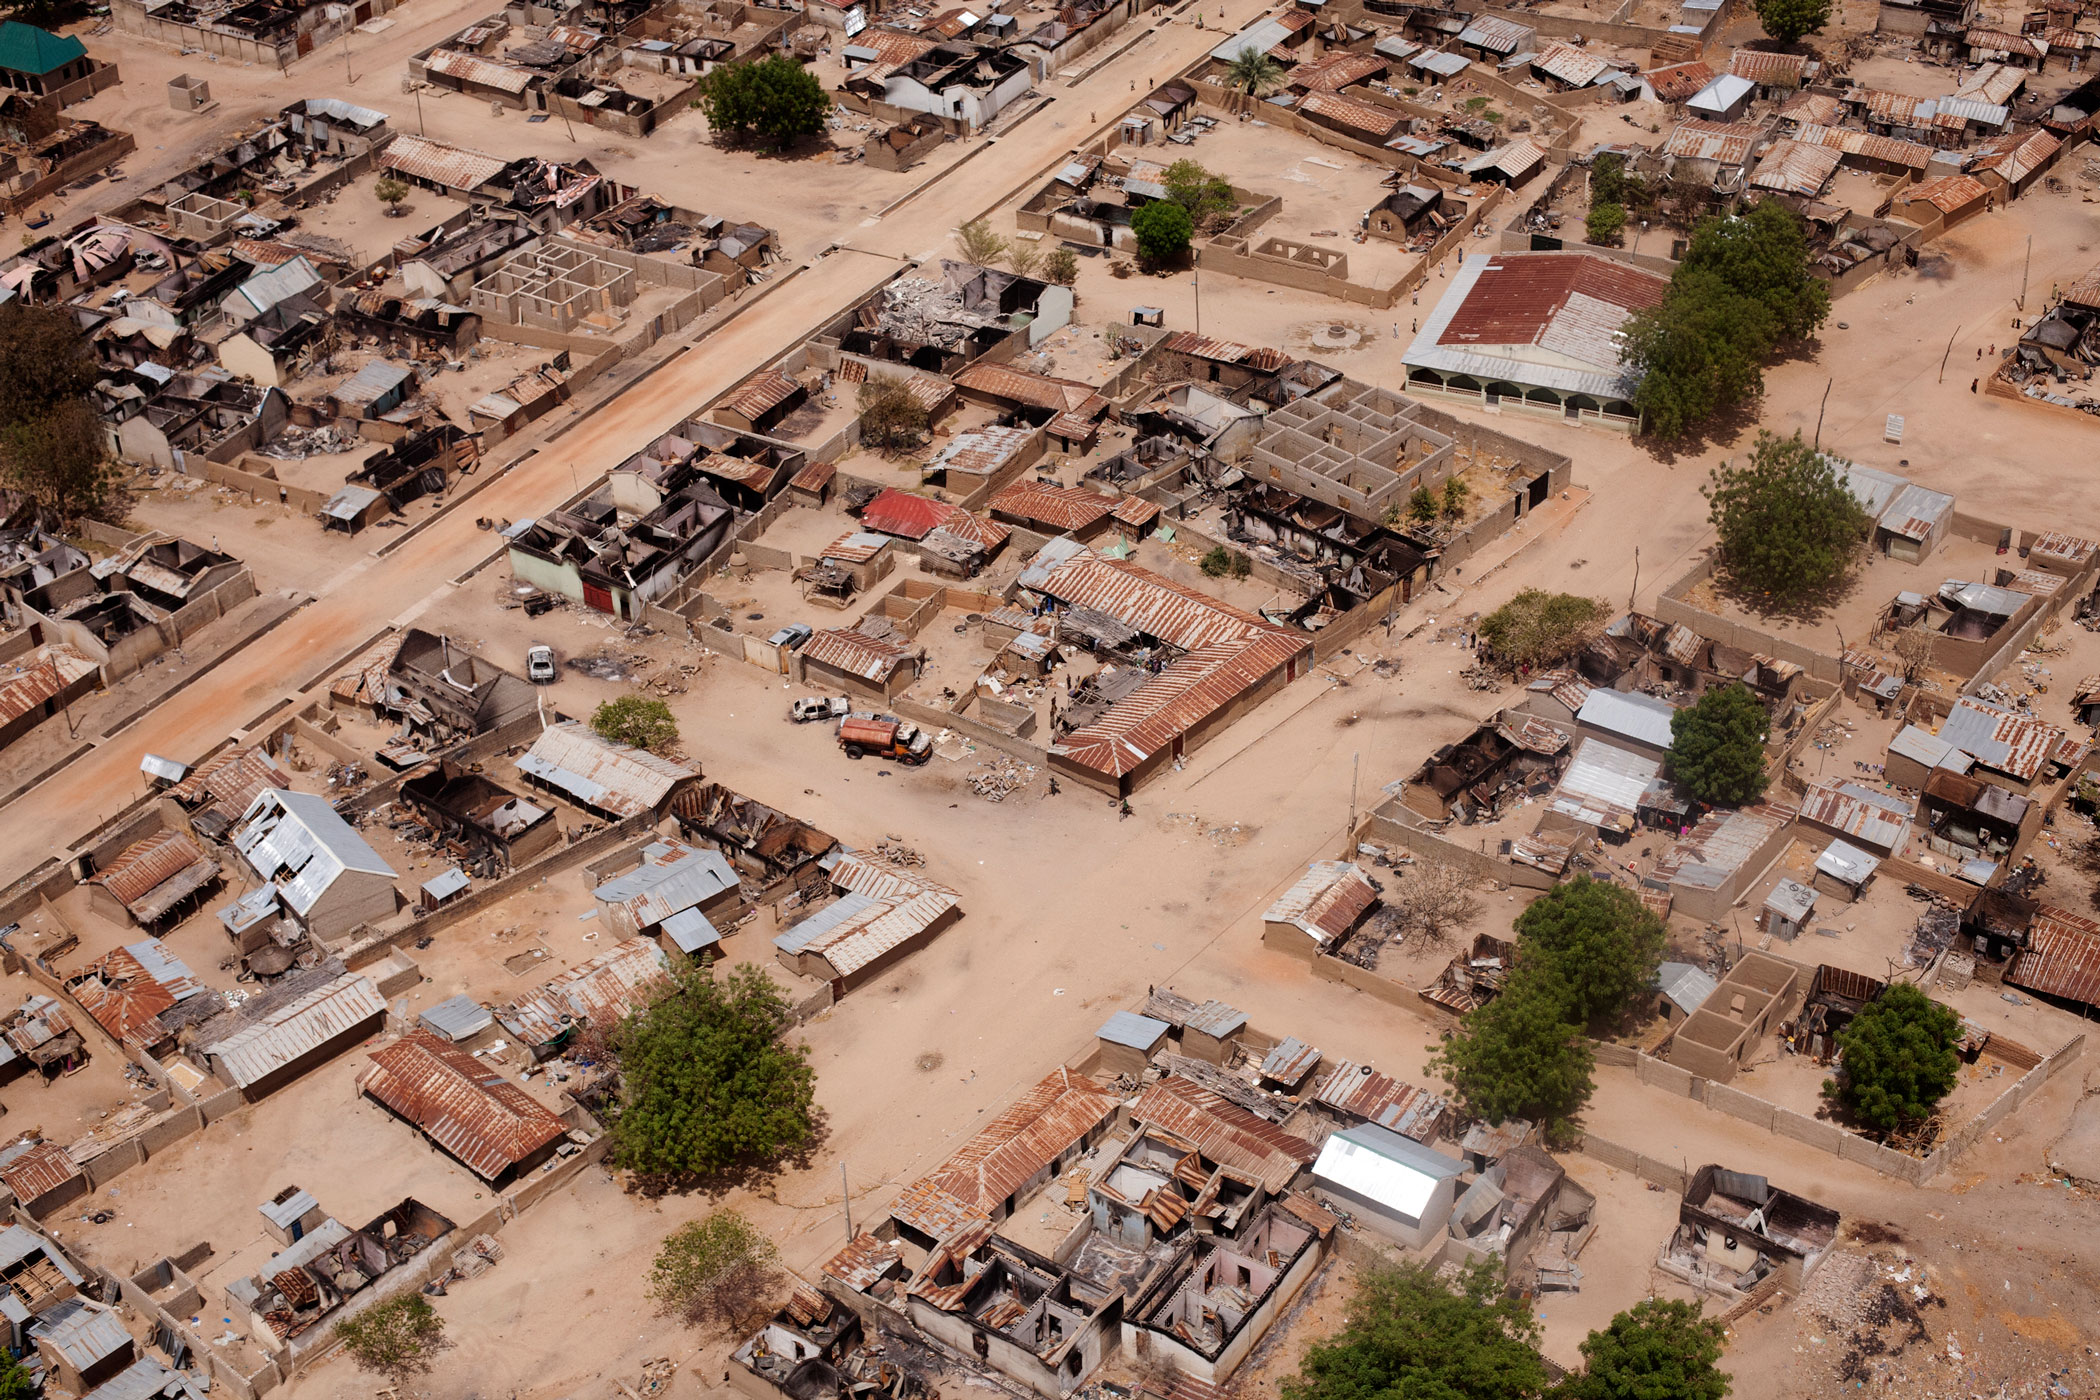 An aerial view of the destroyed town of Gwoza, Boko Haram's base in northern Nigeria, recently retaken by the Nigerians, on April 8, 2015. (Jane Hahn for the Washington Post)